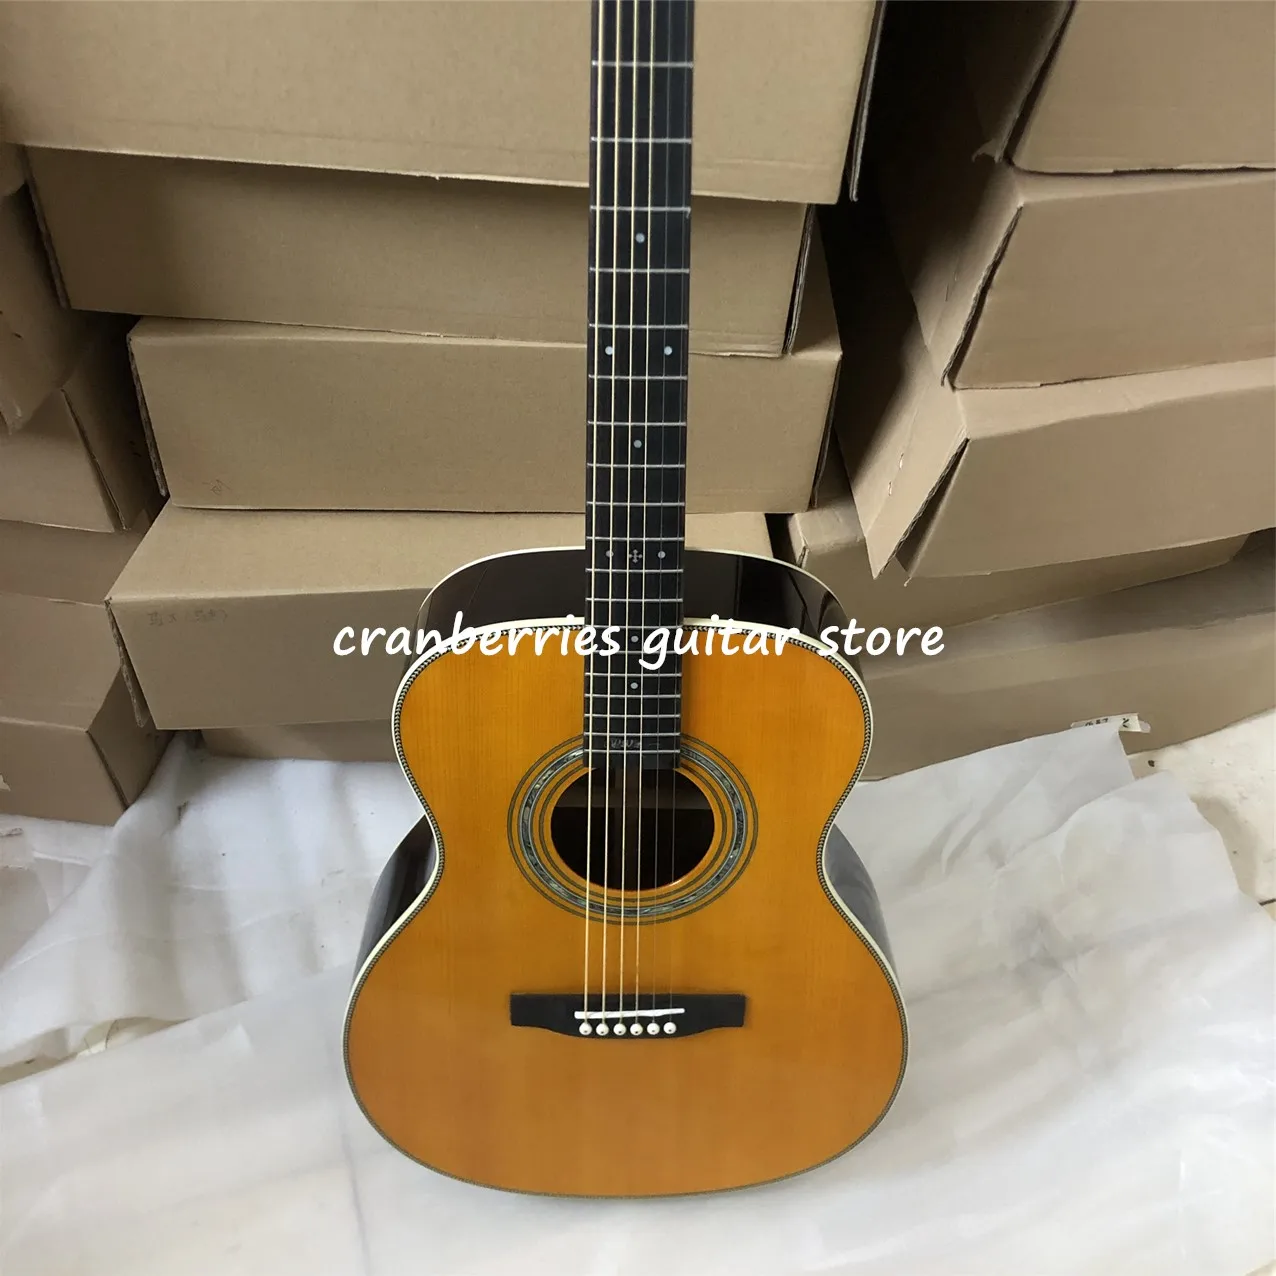 

In Stock OM Body Acoustic Guitar,39 Inches Guitarra,Solid Spruce Top,Rosewood Back and Sides,Matt Finished Neck,Free Shipping